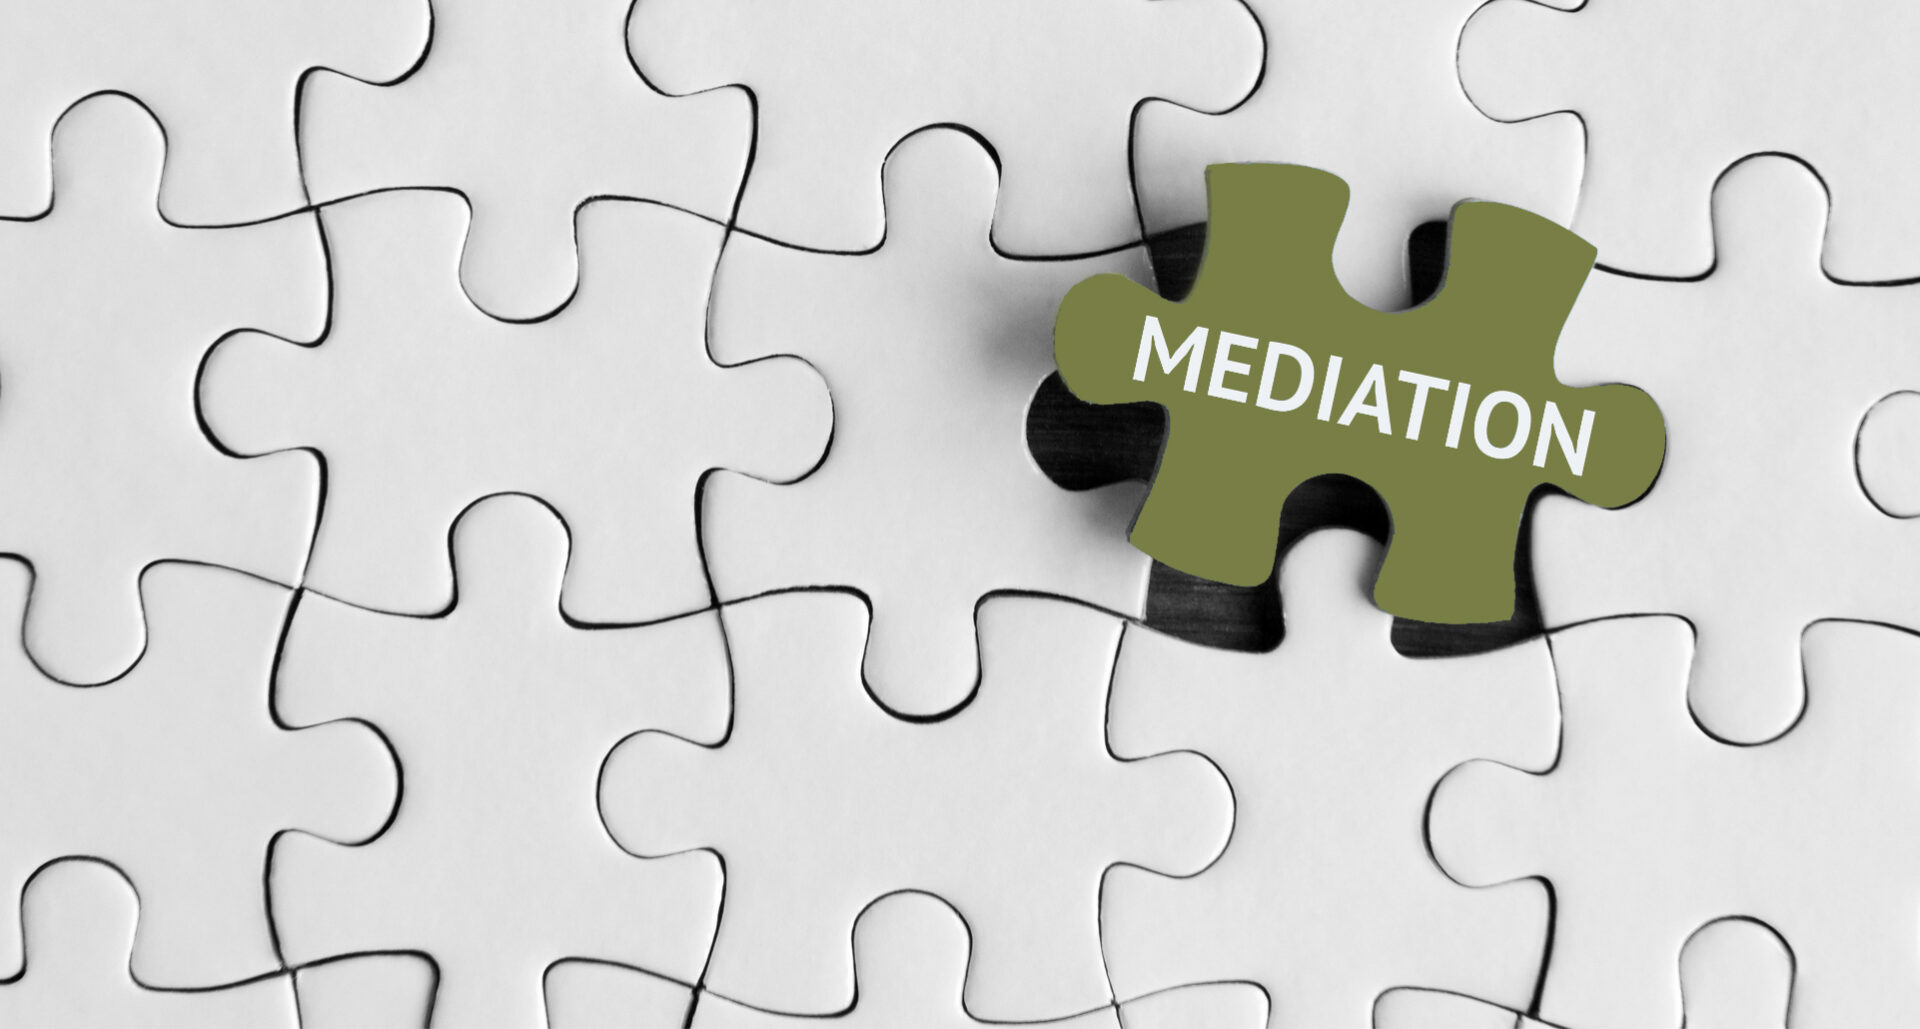 Puzzle piece with Mediation written on it.